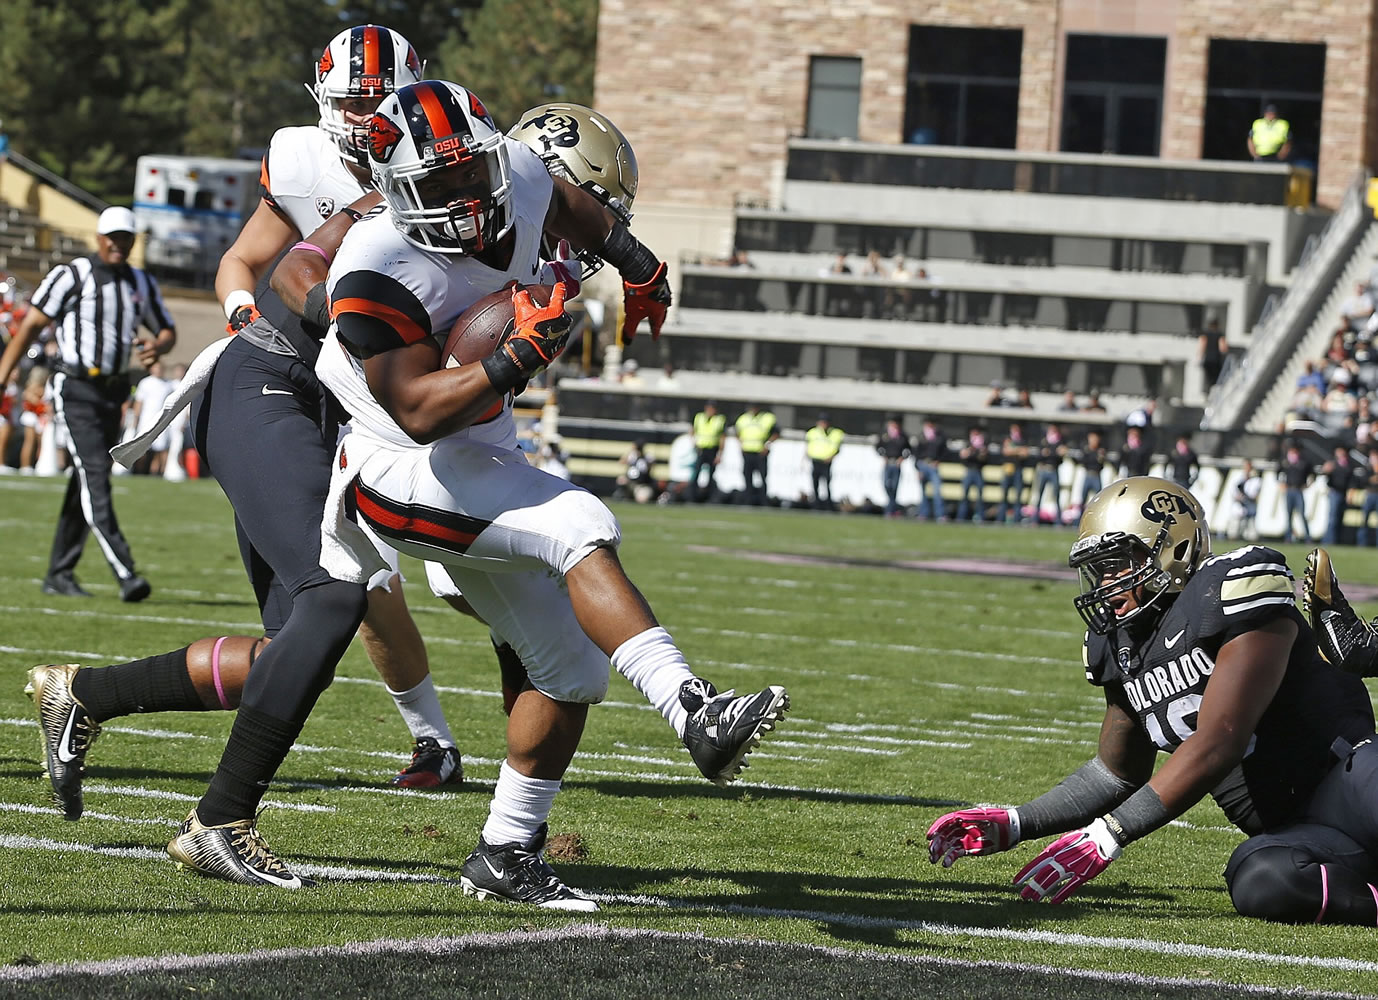 Oregon State running back Terron Ward (28) scores a touchdown against Colorado in the first half at Boulder, Colo., on Saturday, Oct. 4, 2014.